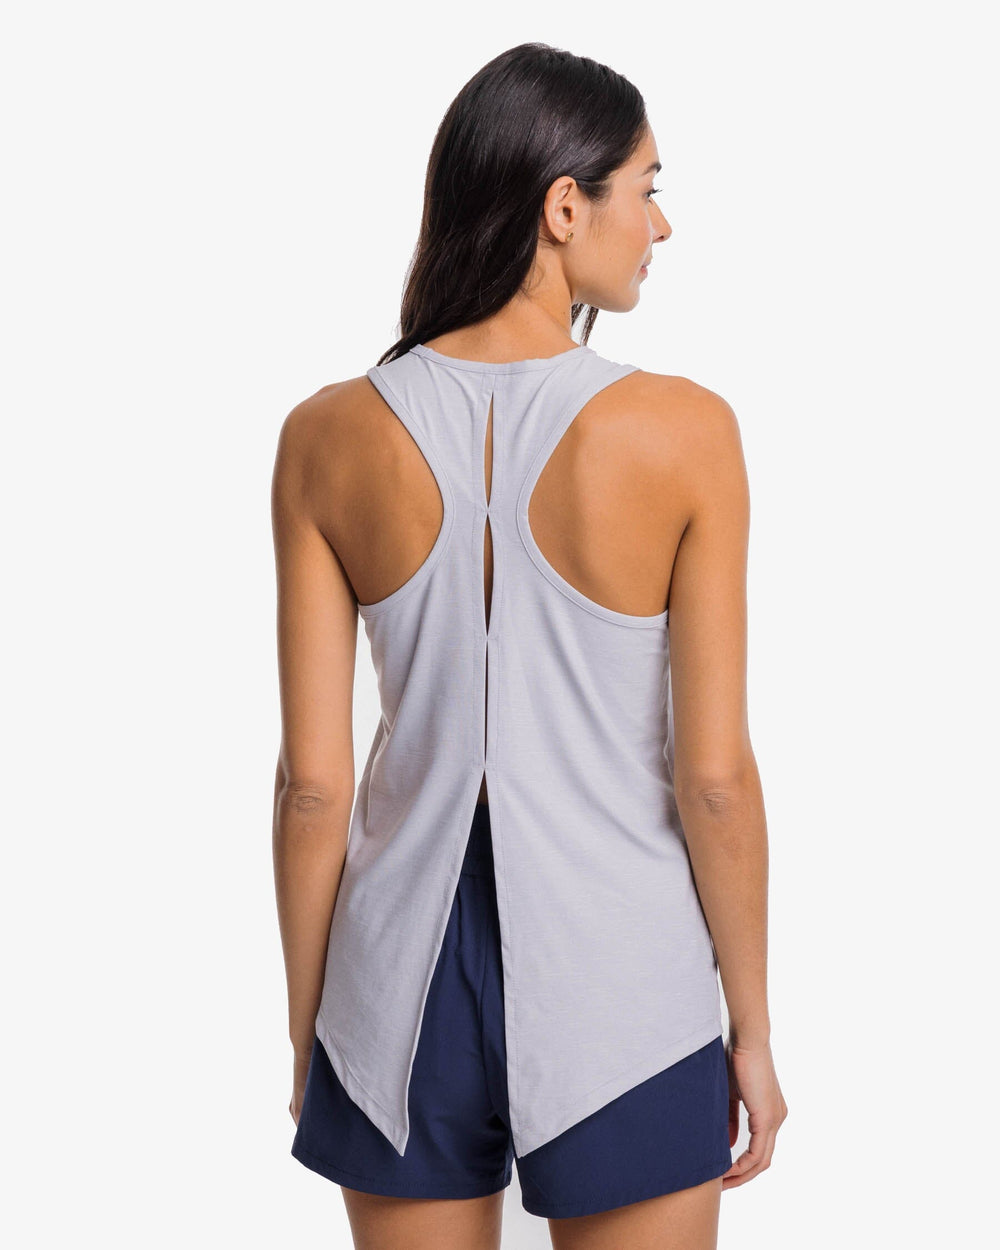 The back view of the Southern Tide Cora brrr illiant Tie Back Tank by Southern Tide - Platinum Grey